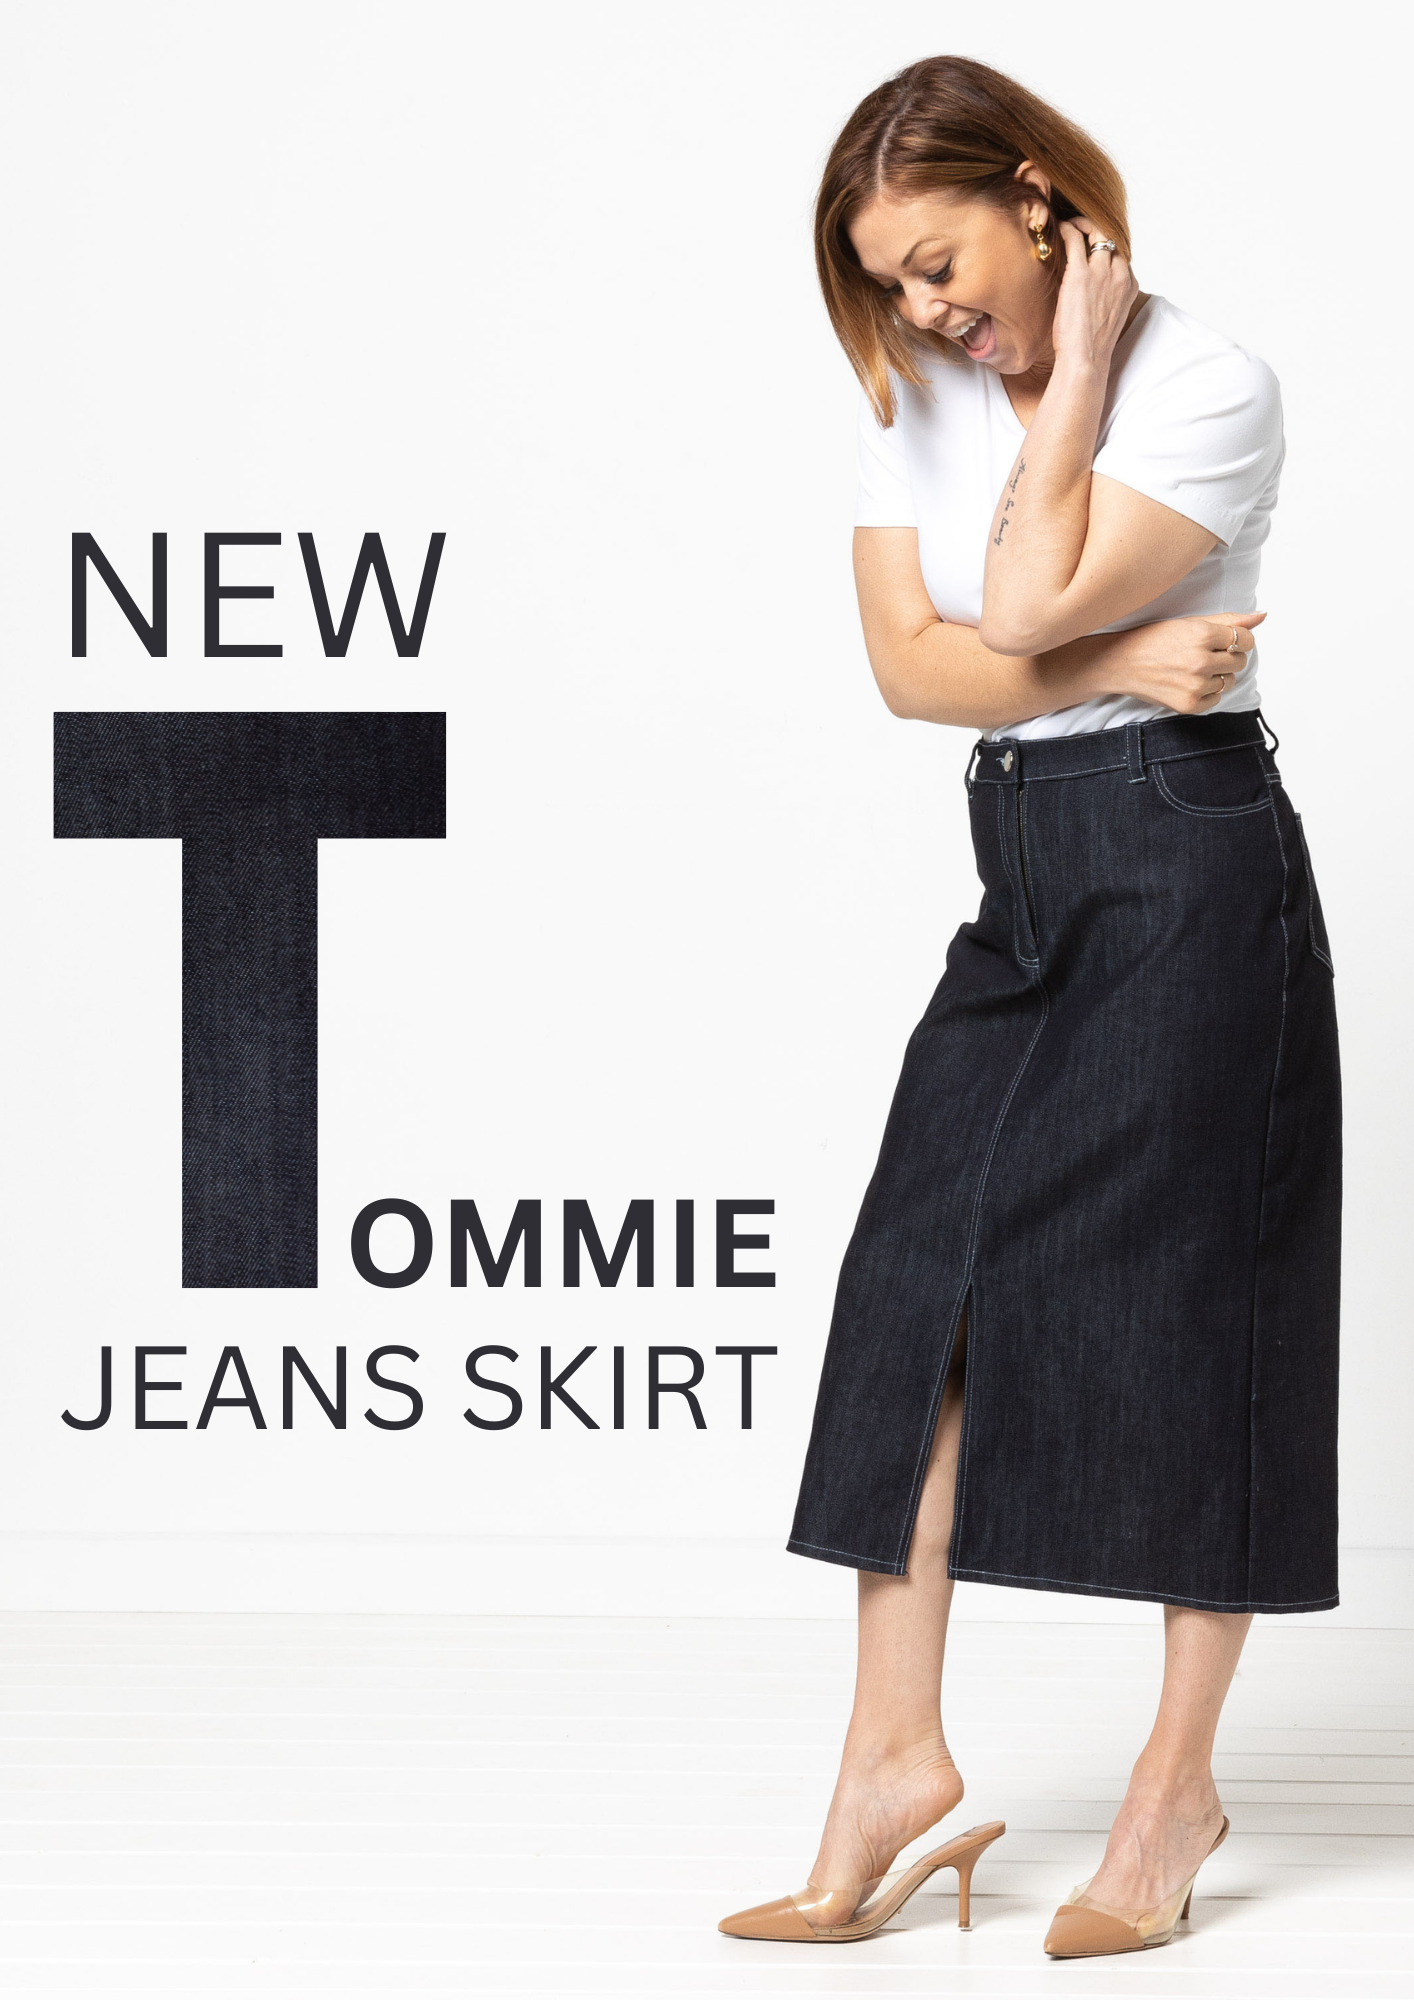 New Pattern - Tommie Jeans Skirt